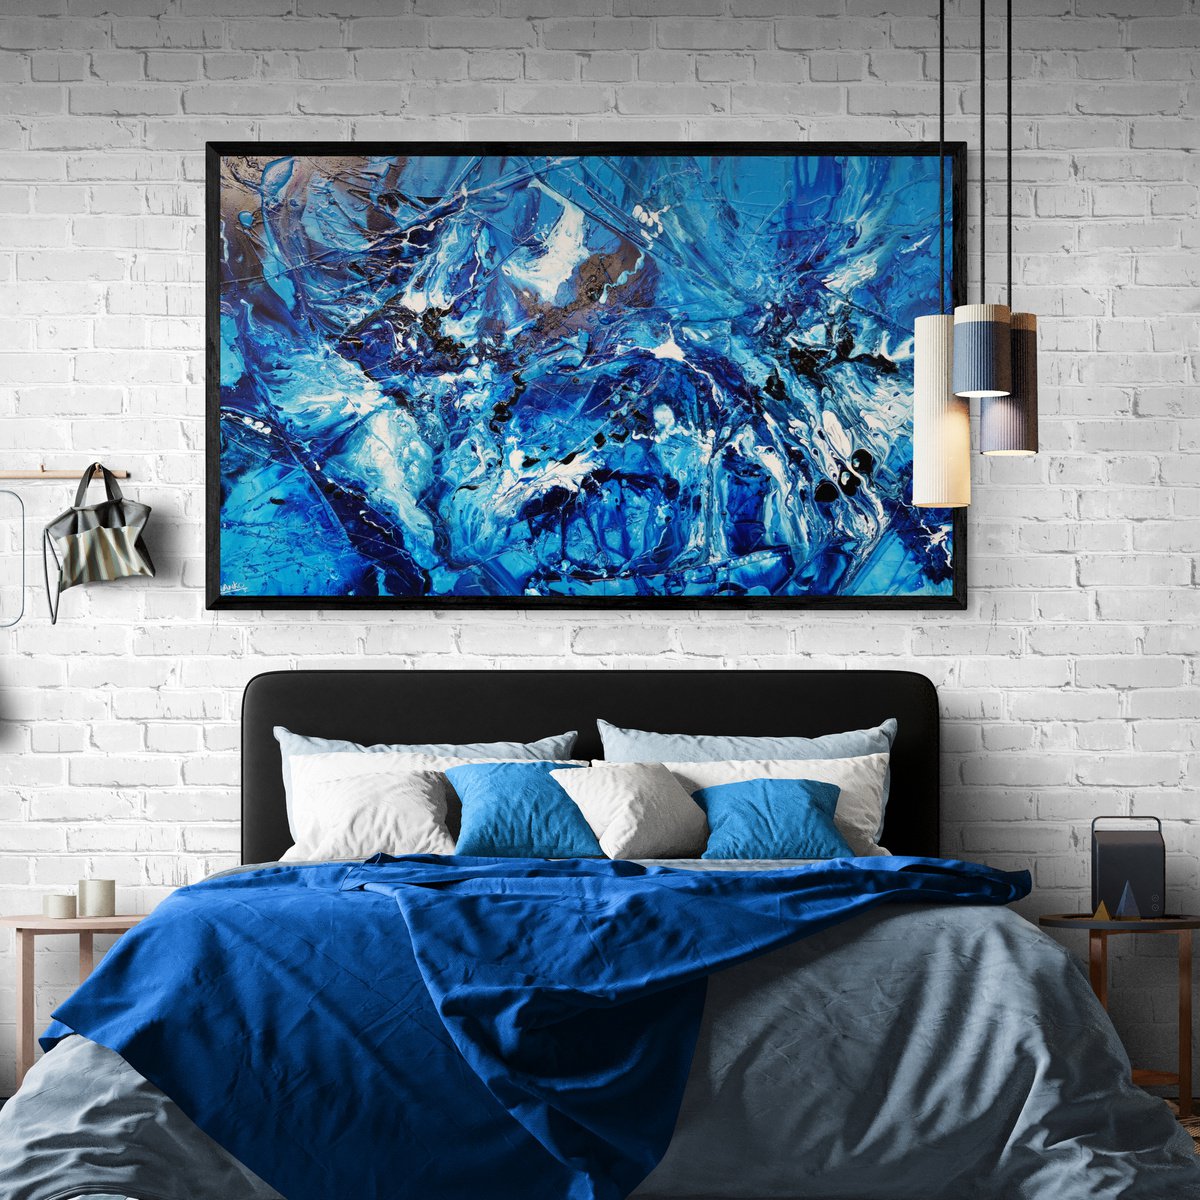 Aquafied 200cm x 120cm Blue Textured Abstract Art by Franko